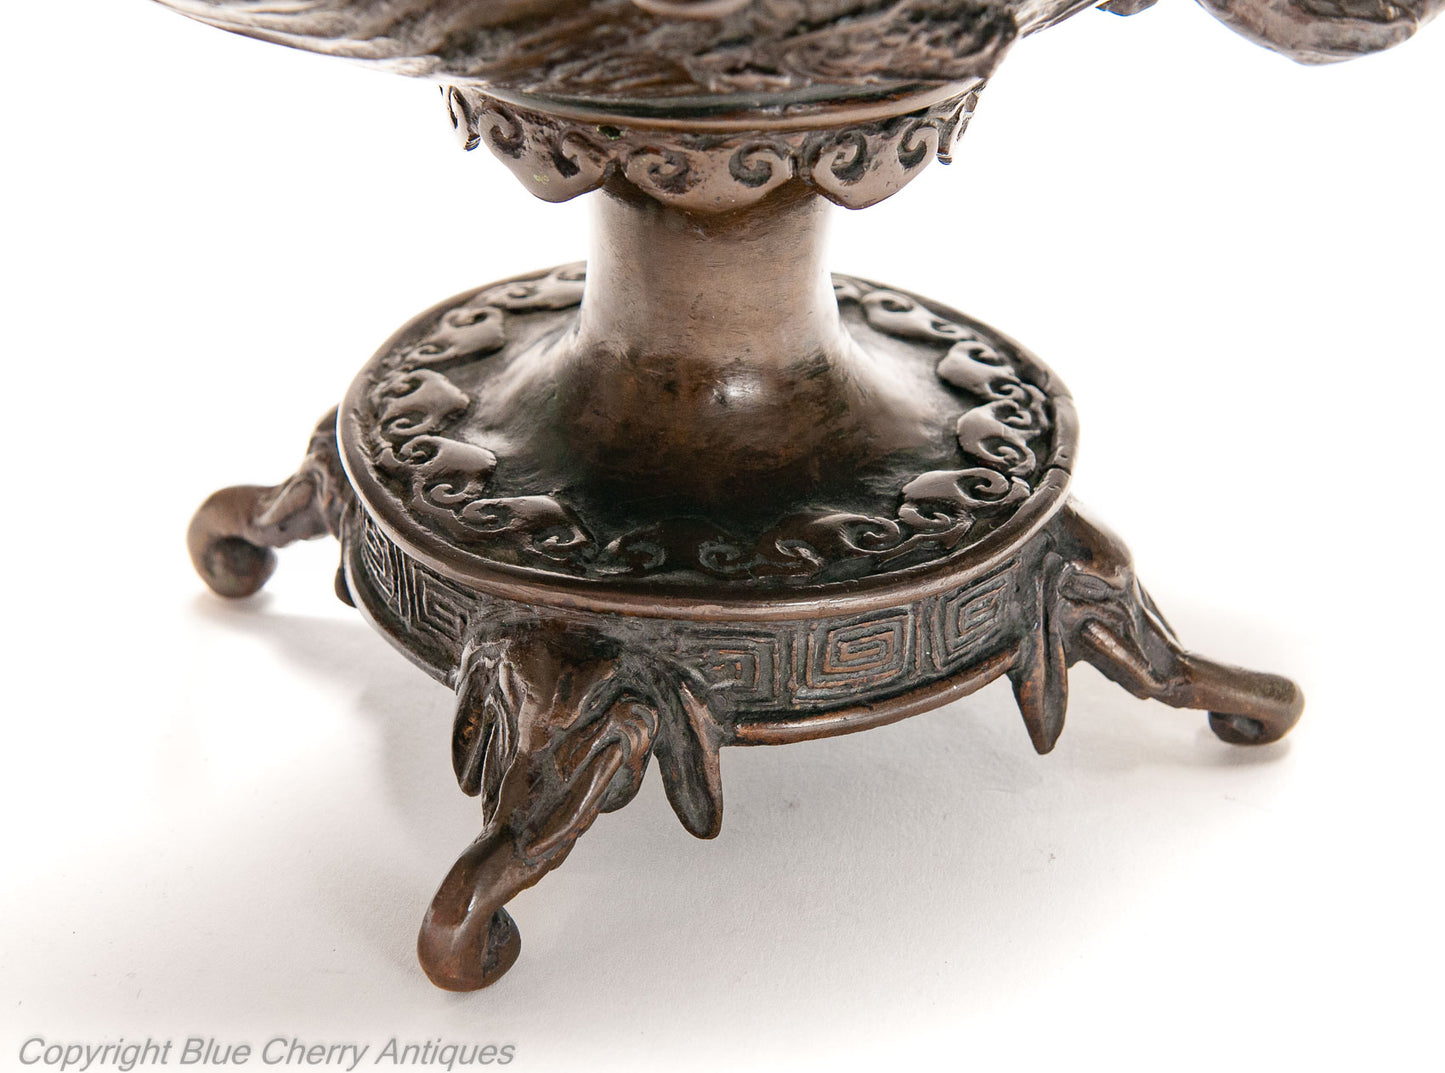 Chinese Cast Bronze Libation Cup Shaped Vessel with Dragon and Flaming Pearl (Code 1987)